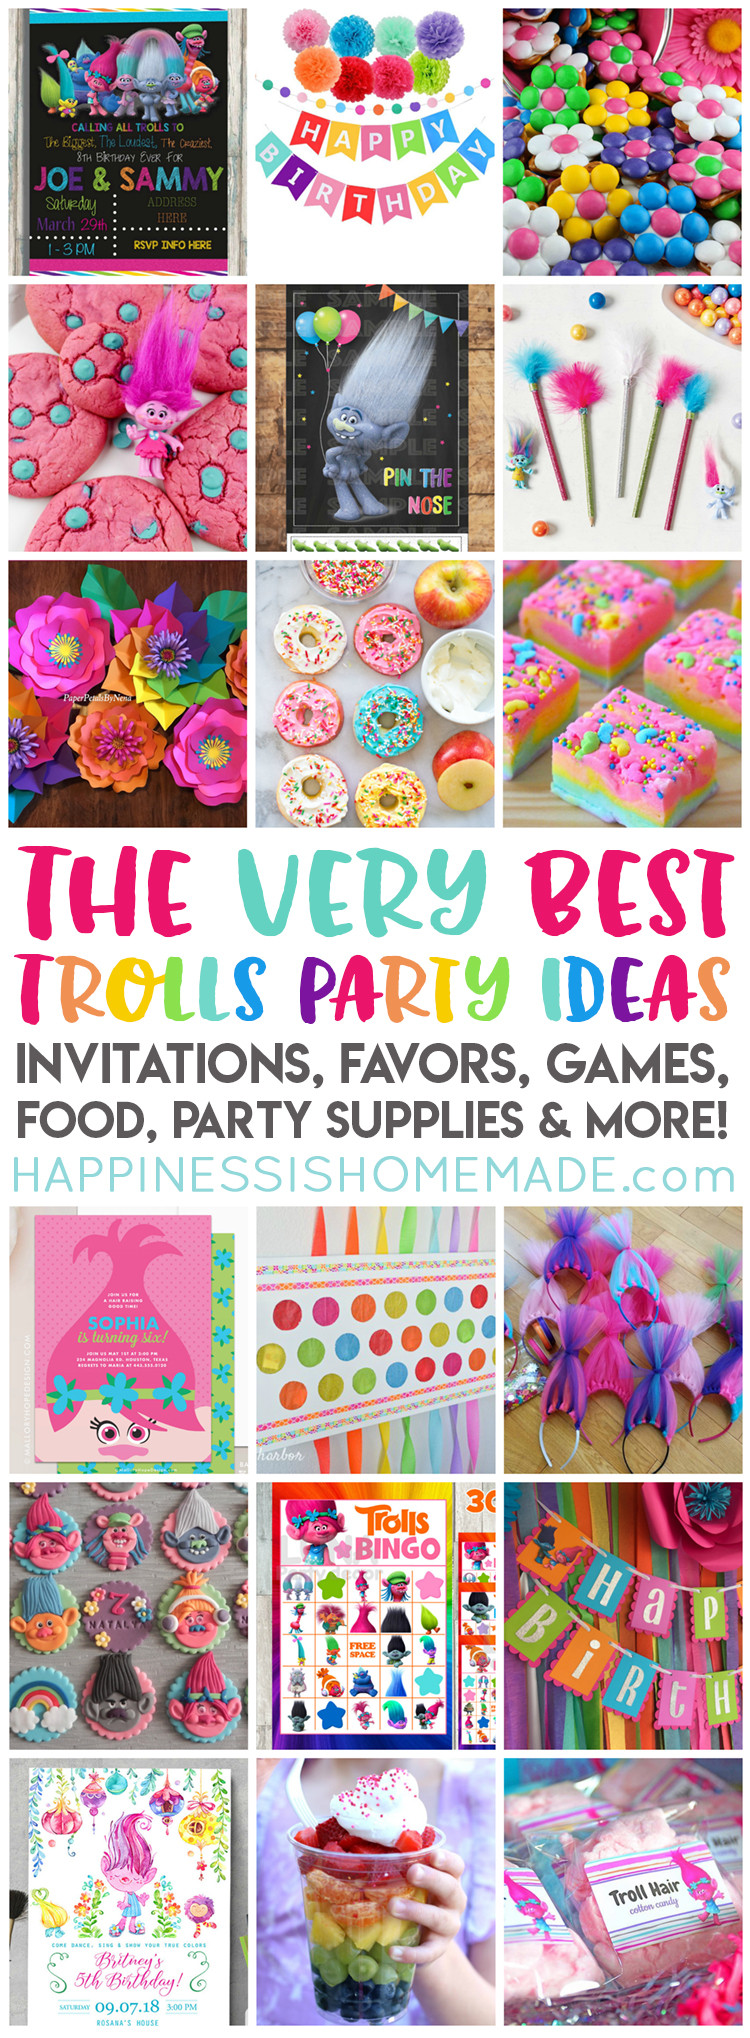 Trolls Party Favor Ideas
 The Best Trolls Birthday Party Ideas Happiness is Homemade